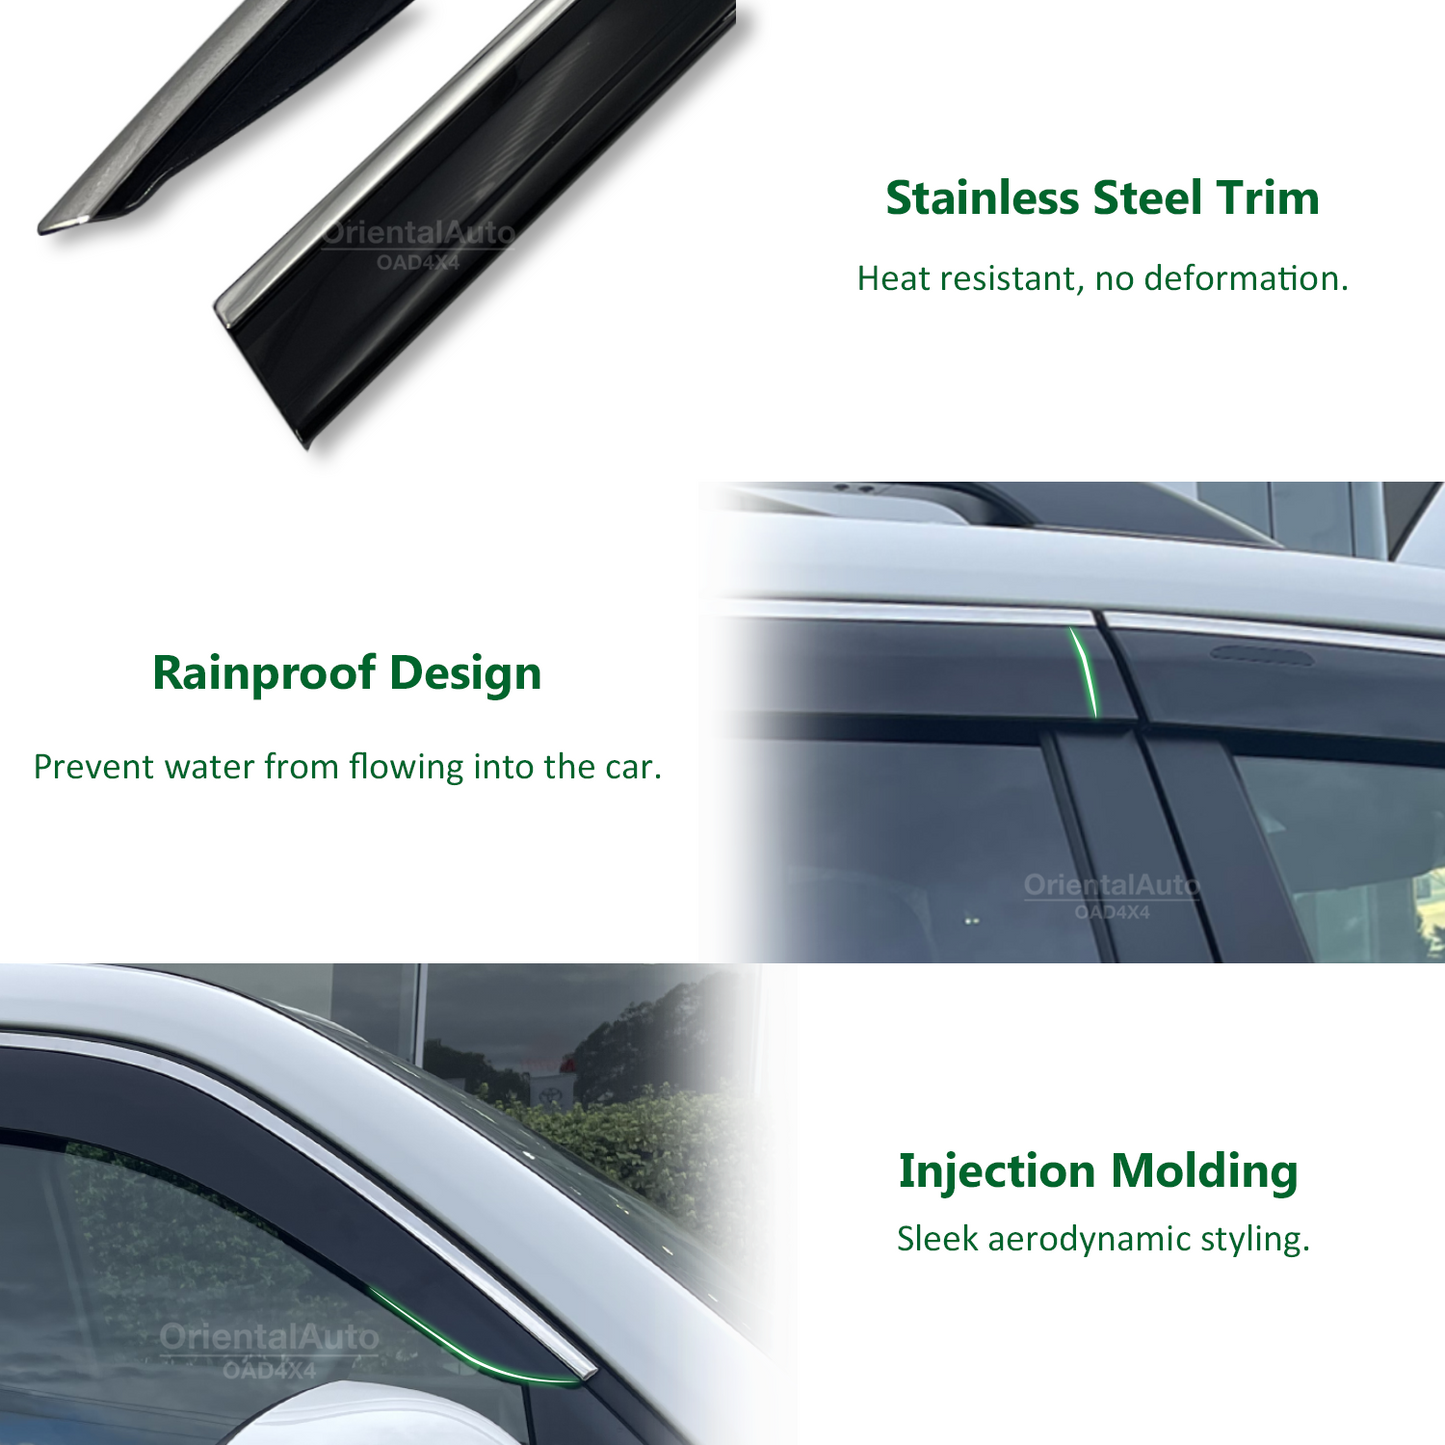 Injection Stainless 6pcs Weathershield & Injection Modeling Bonnet Protector for Toyota RAV4 2019-Onwards Weather Shields Window Visor + Hood Protector Bonnet Guard for RAV 4